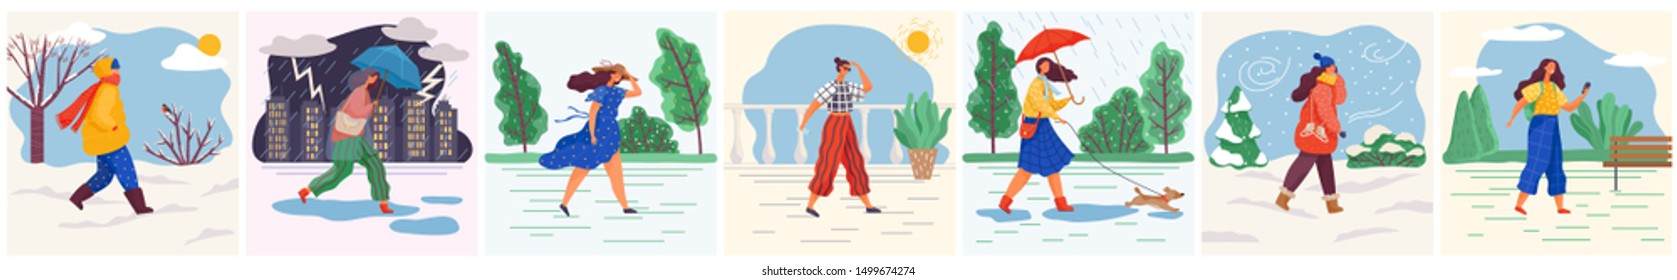 Woman walking in sunny and snowy weather. Set of characters wearing clothes to weather conditions. Rainfall and thunderstorm in city. Landscapes with trees and cities with skyscrapers. Various weather